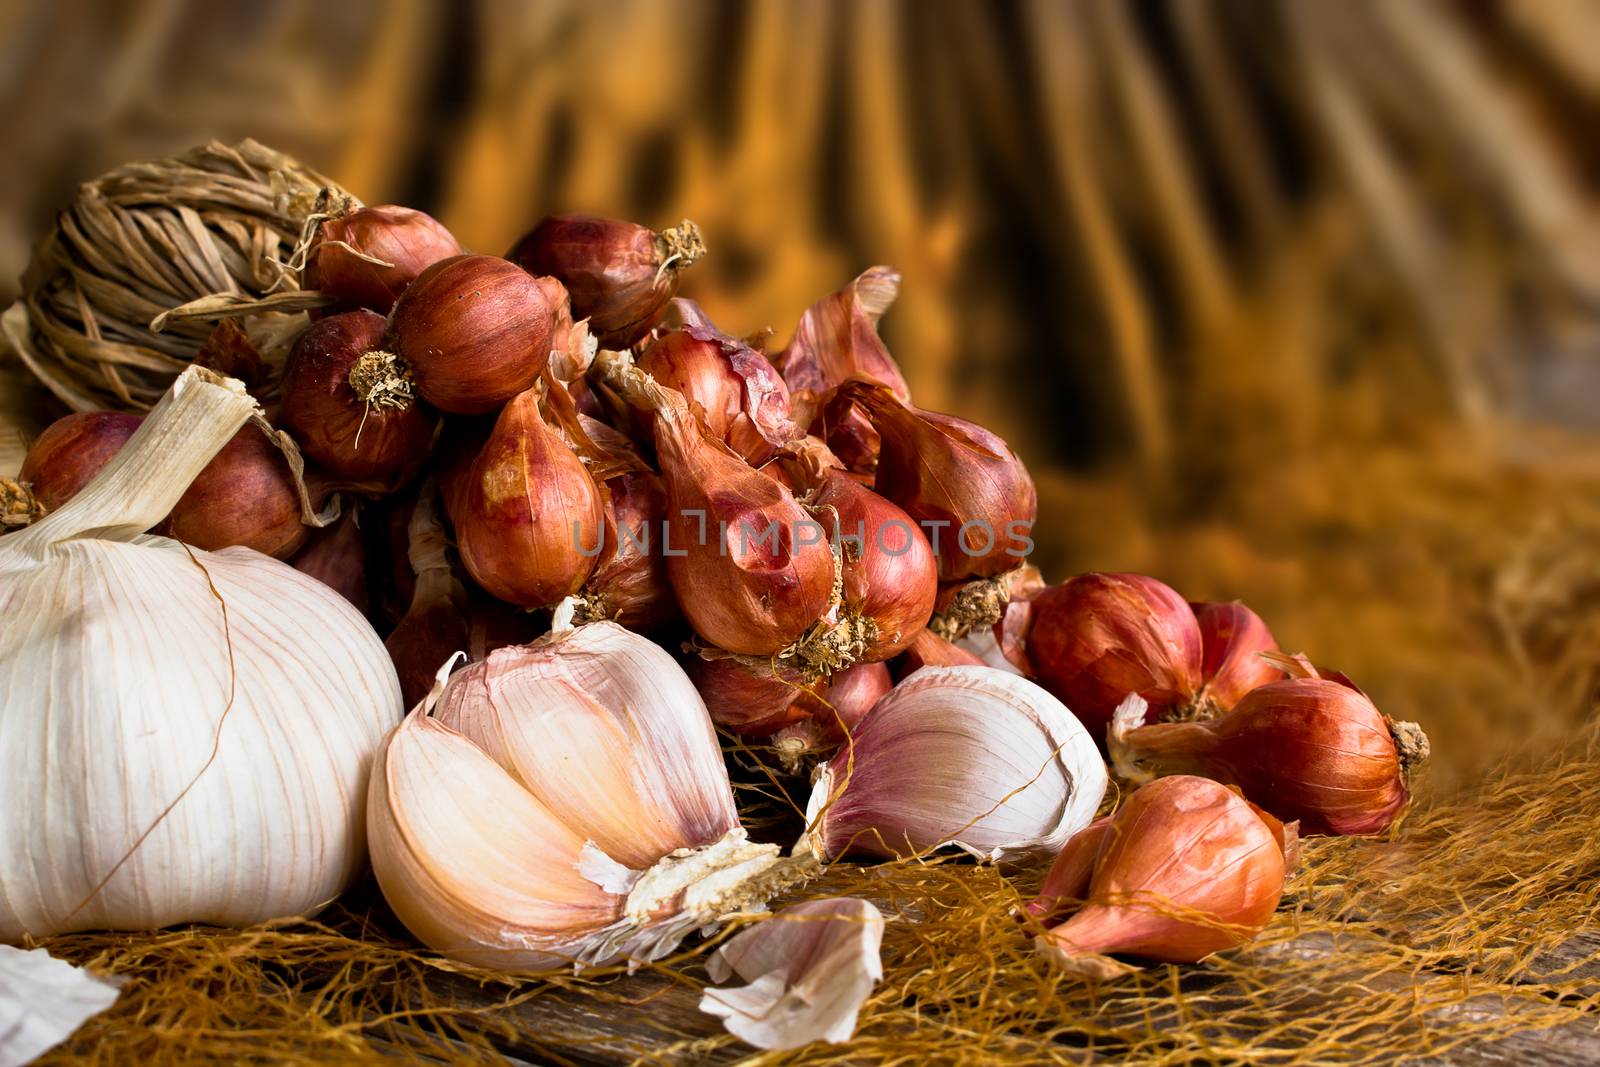 Vintage garlic and onion in still life style